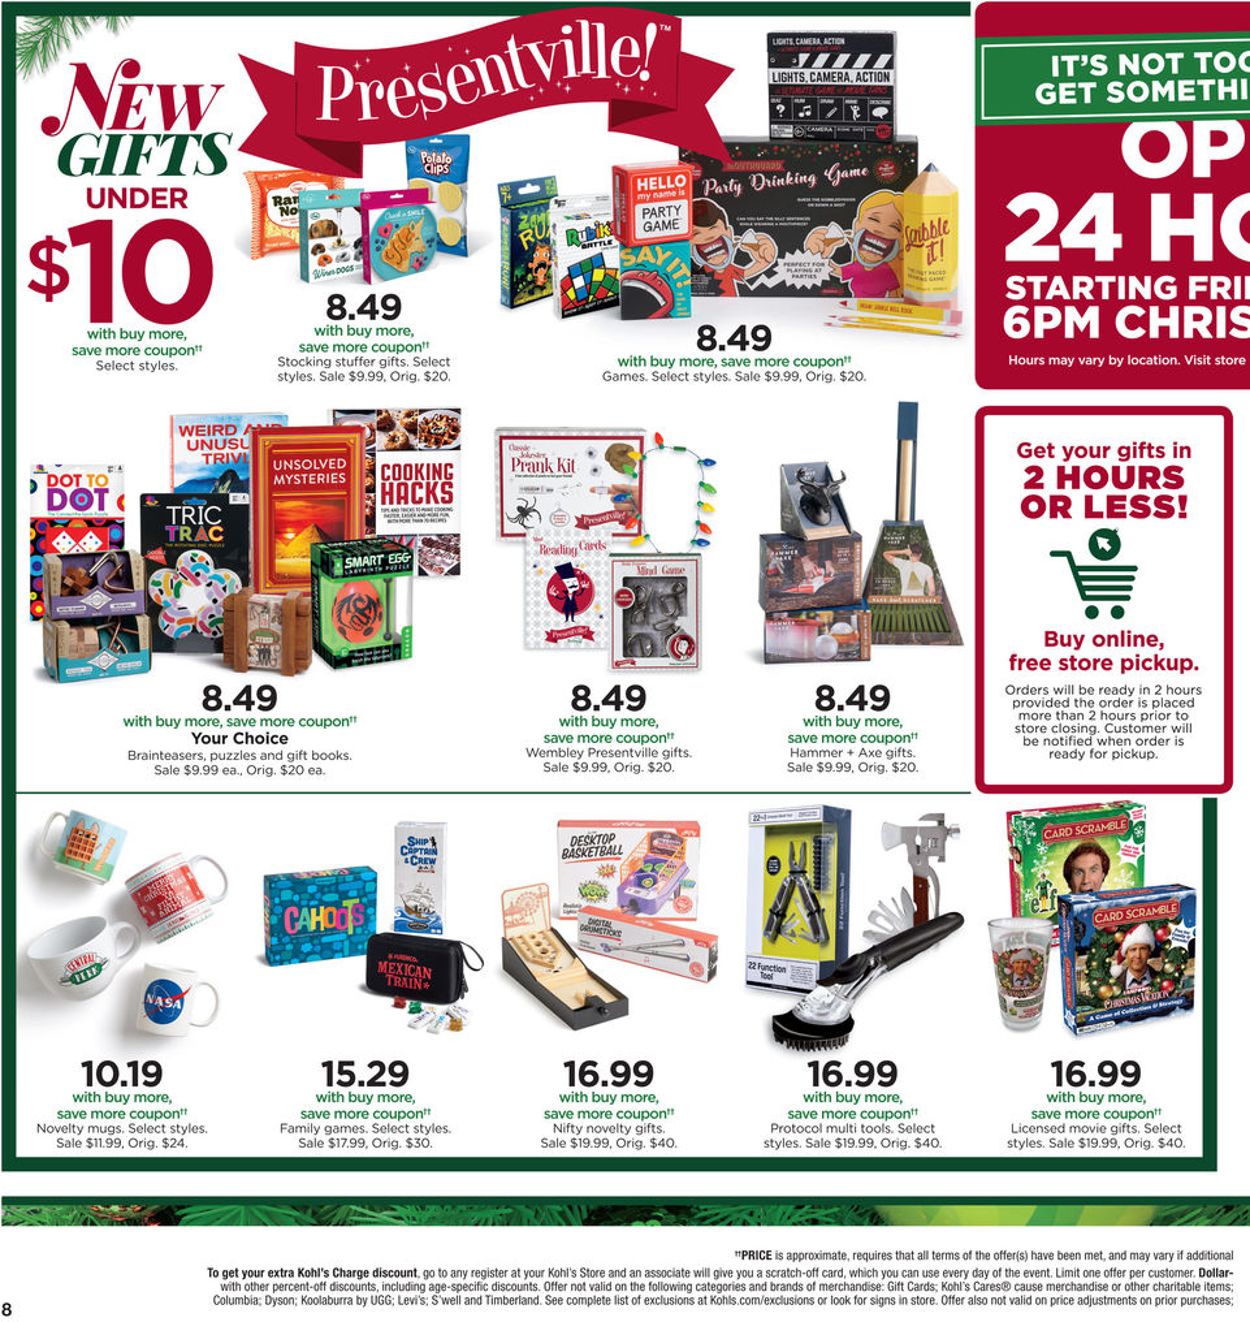 Catalogue Kohl's - Christmas Ad 2019 from 12/20/2019